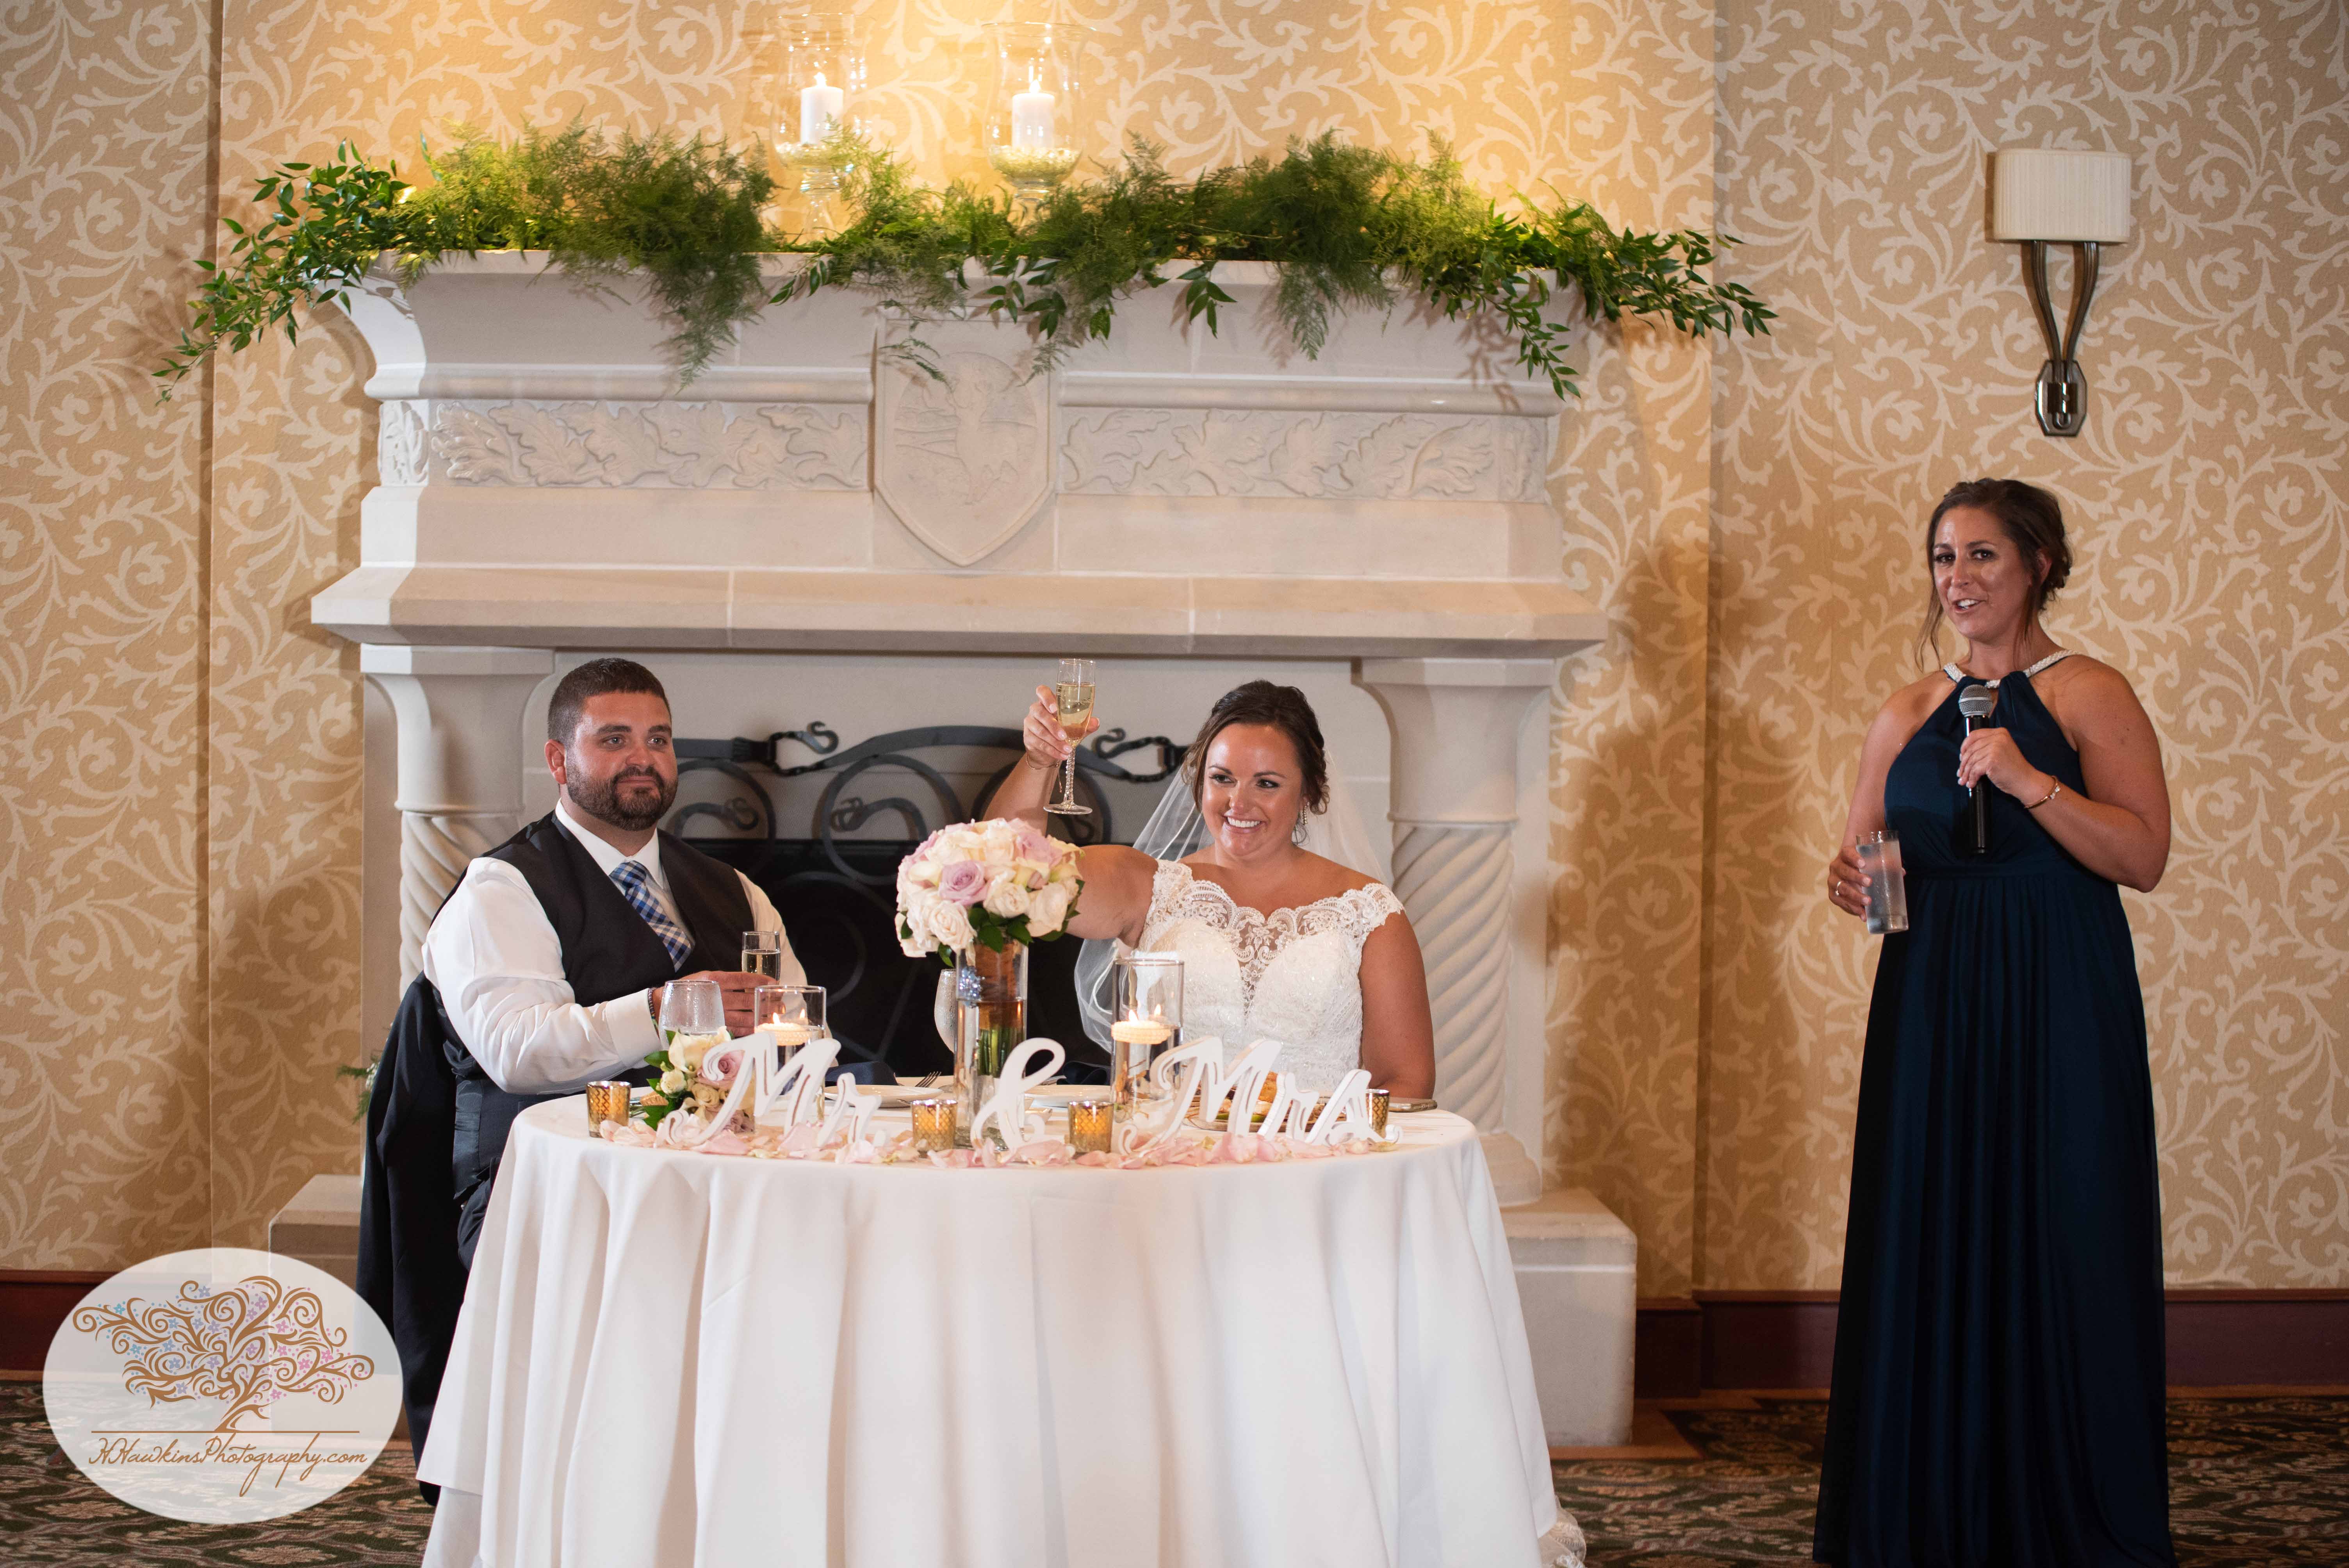 Speech by Maid of Honor as bride and groom toast